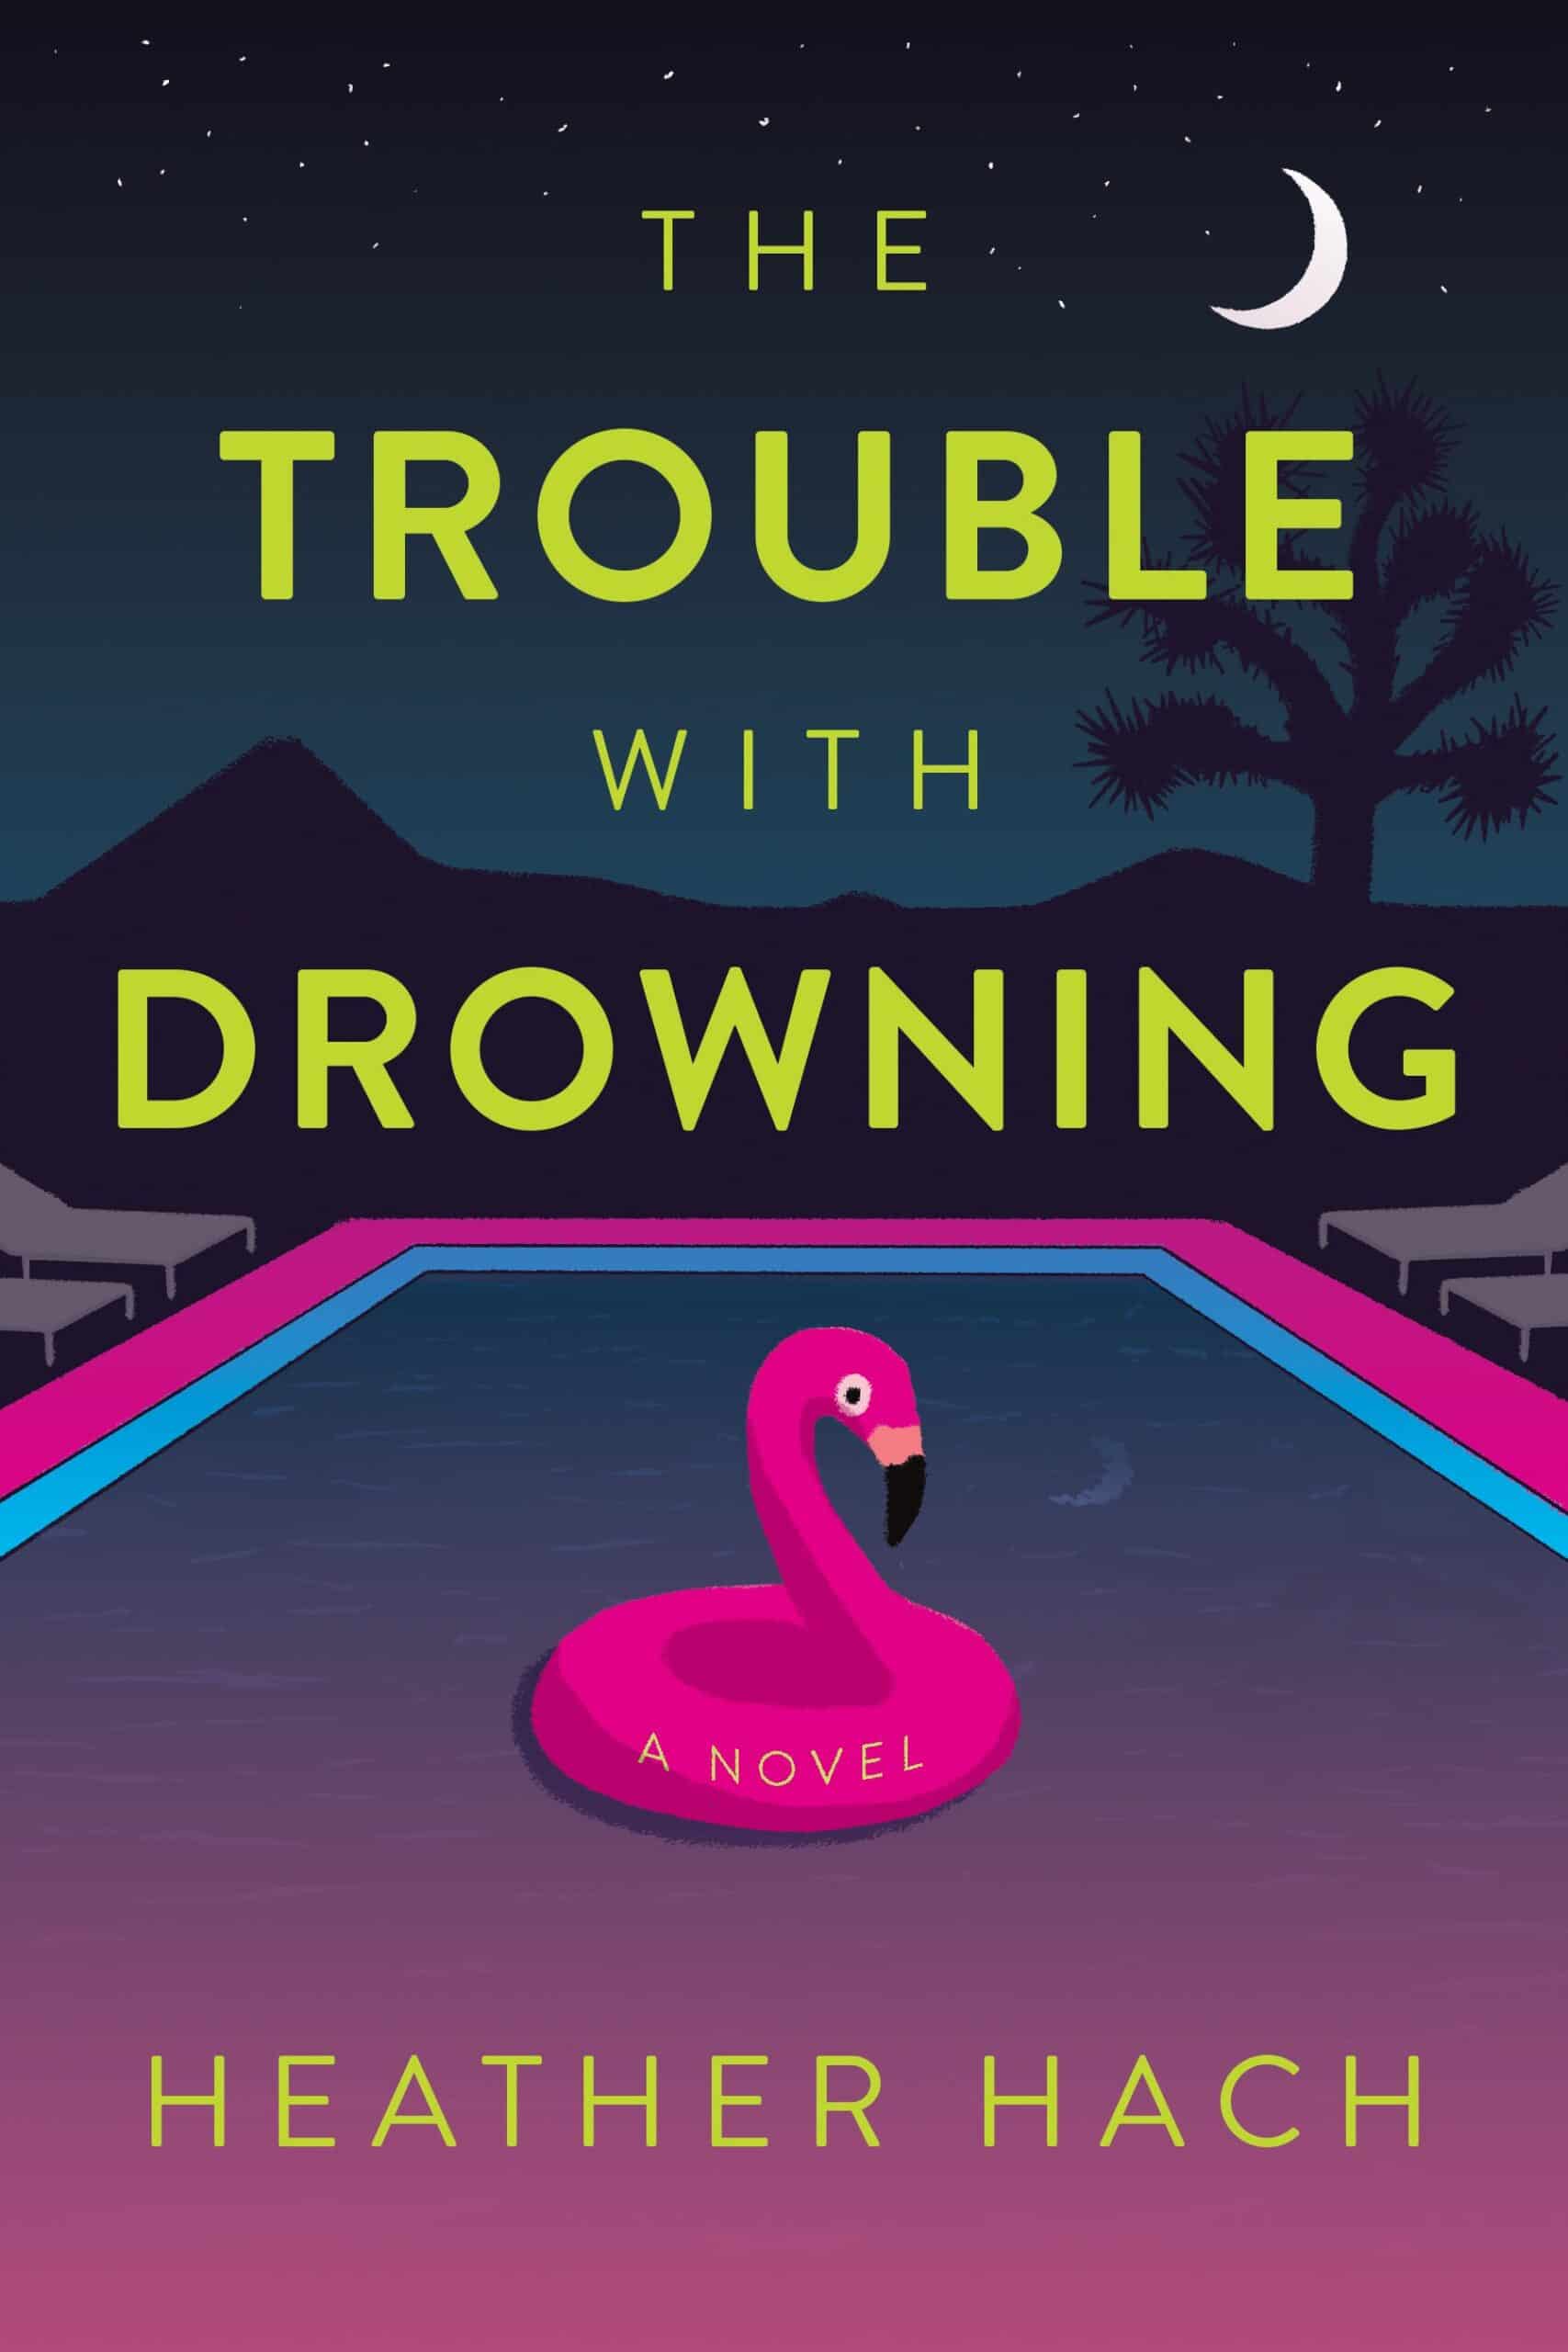 The Trouble With Drowning